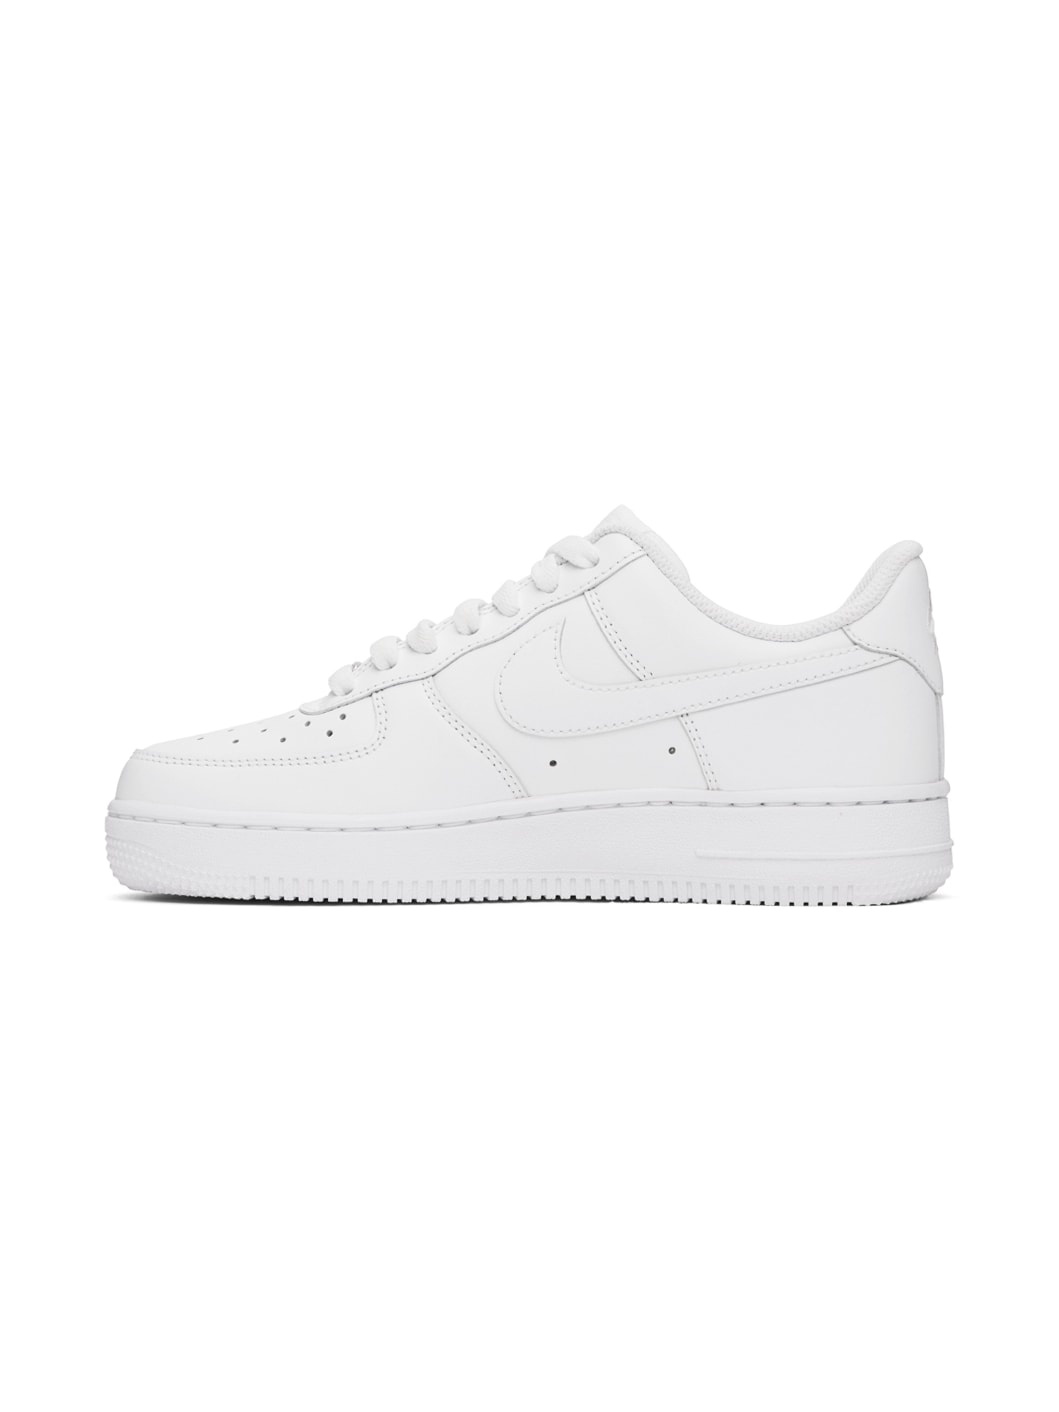 White Air Force 1 '07 Sneakers - 3